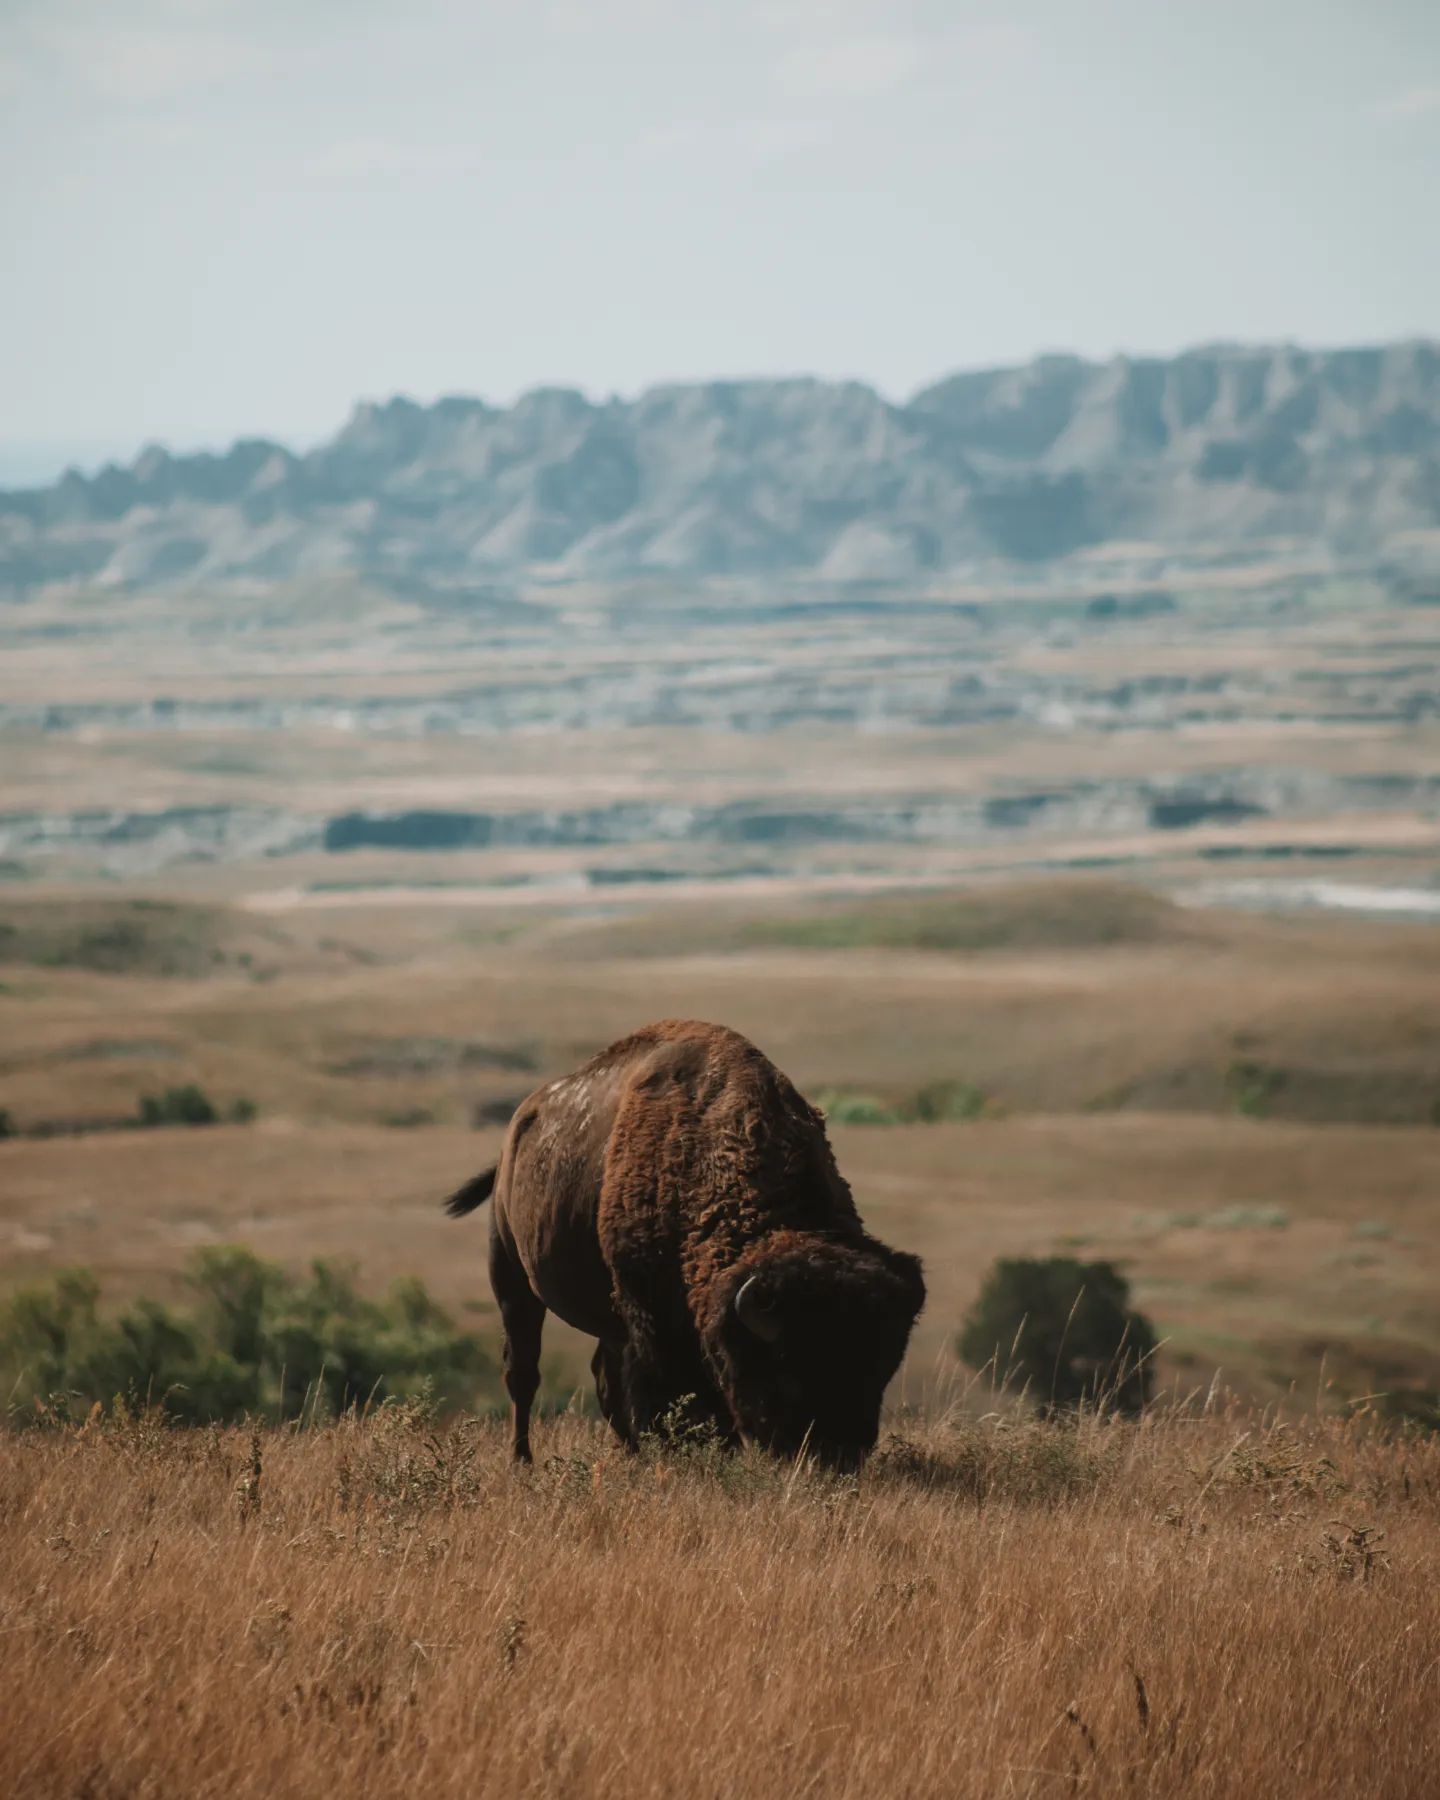 Getting up in the morning offers more opportunities to spot bison, bighorn sheep, and so many other types of wildlife